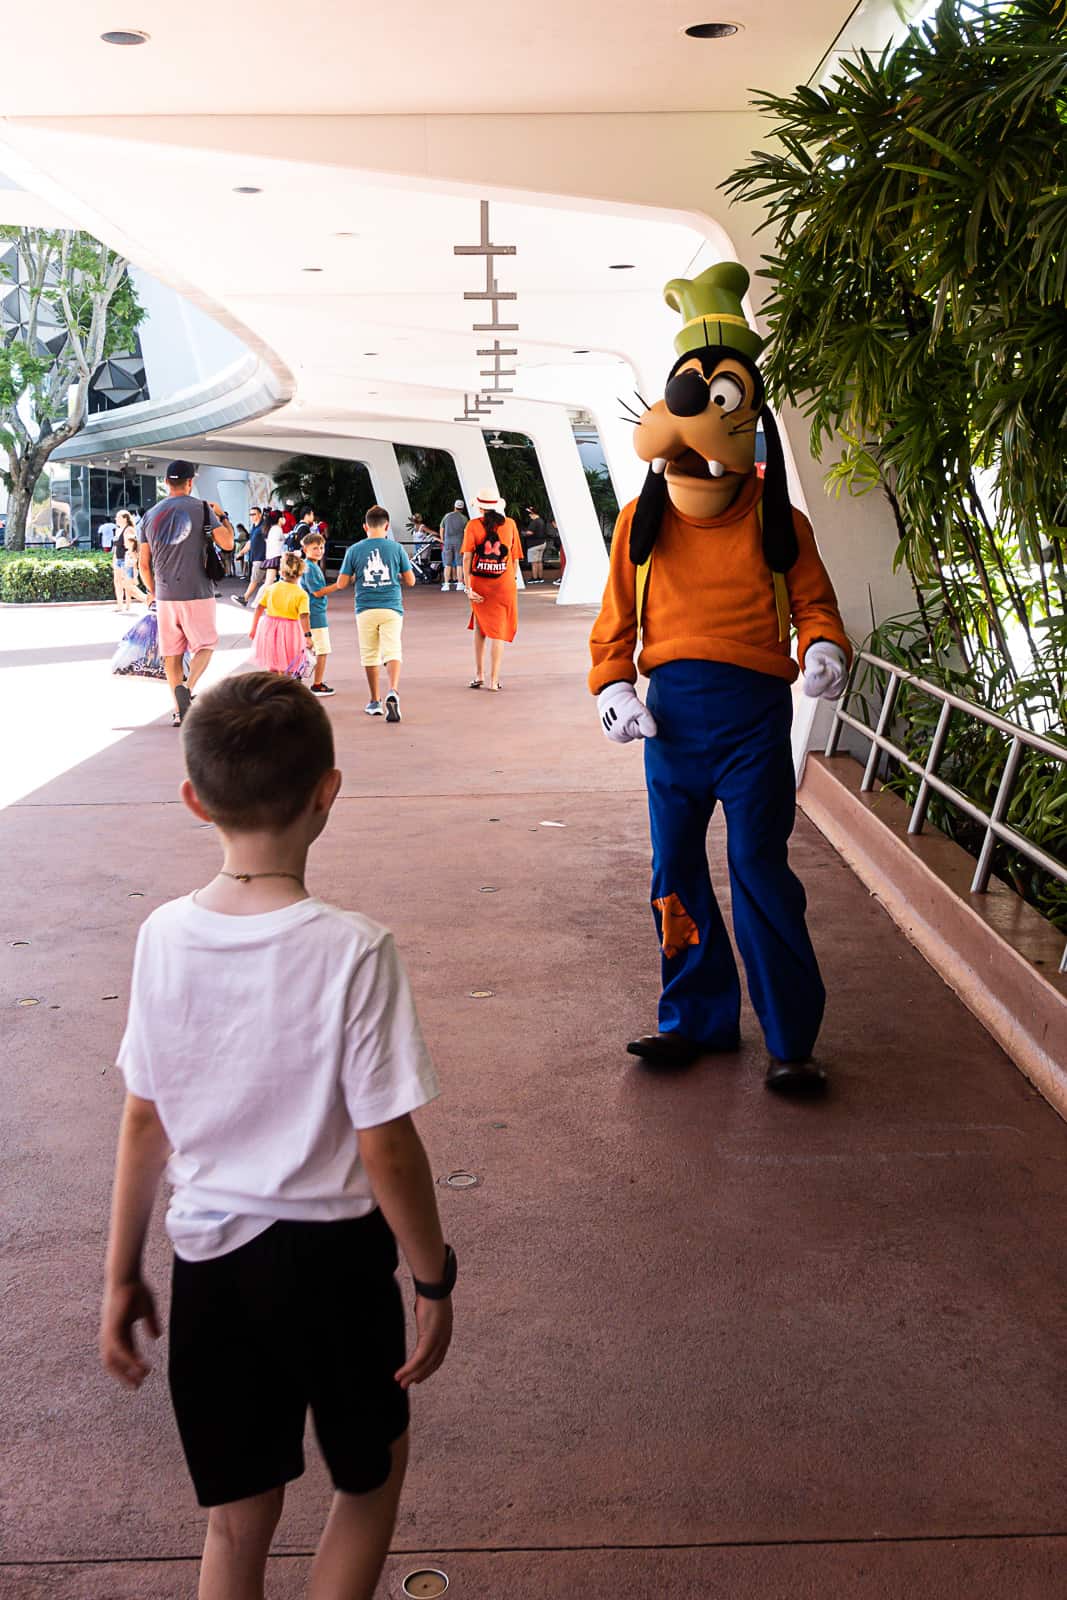 Disney World Goofy Character Meet and Greet Experience in Epcot